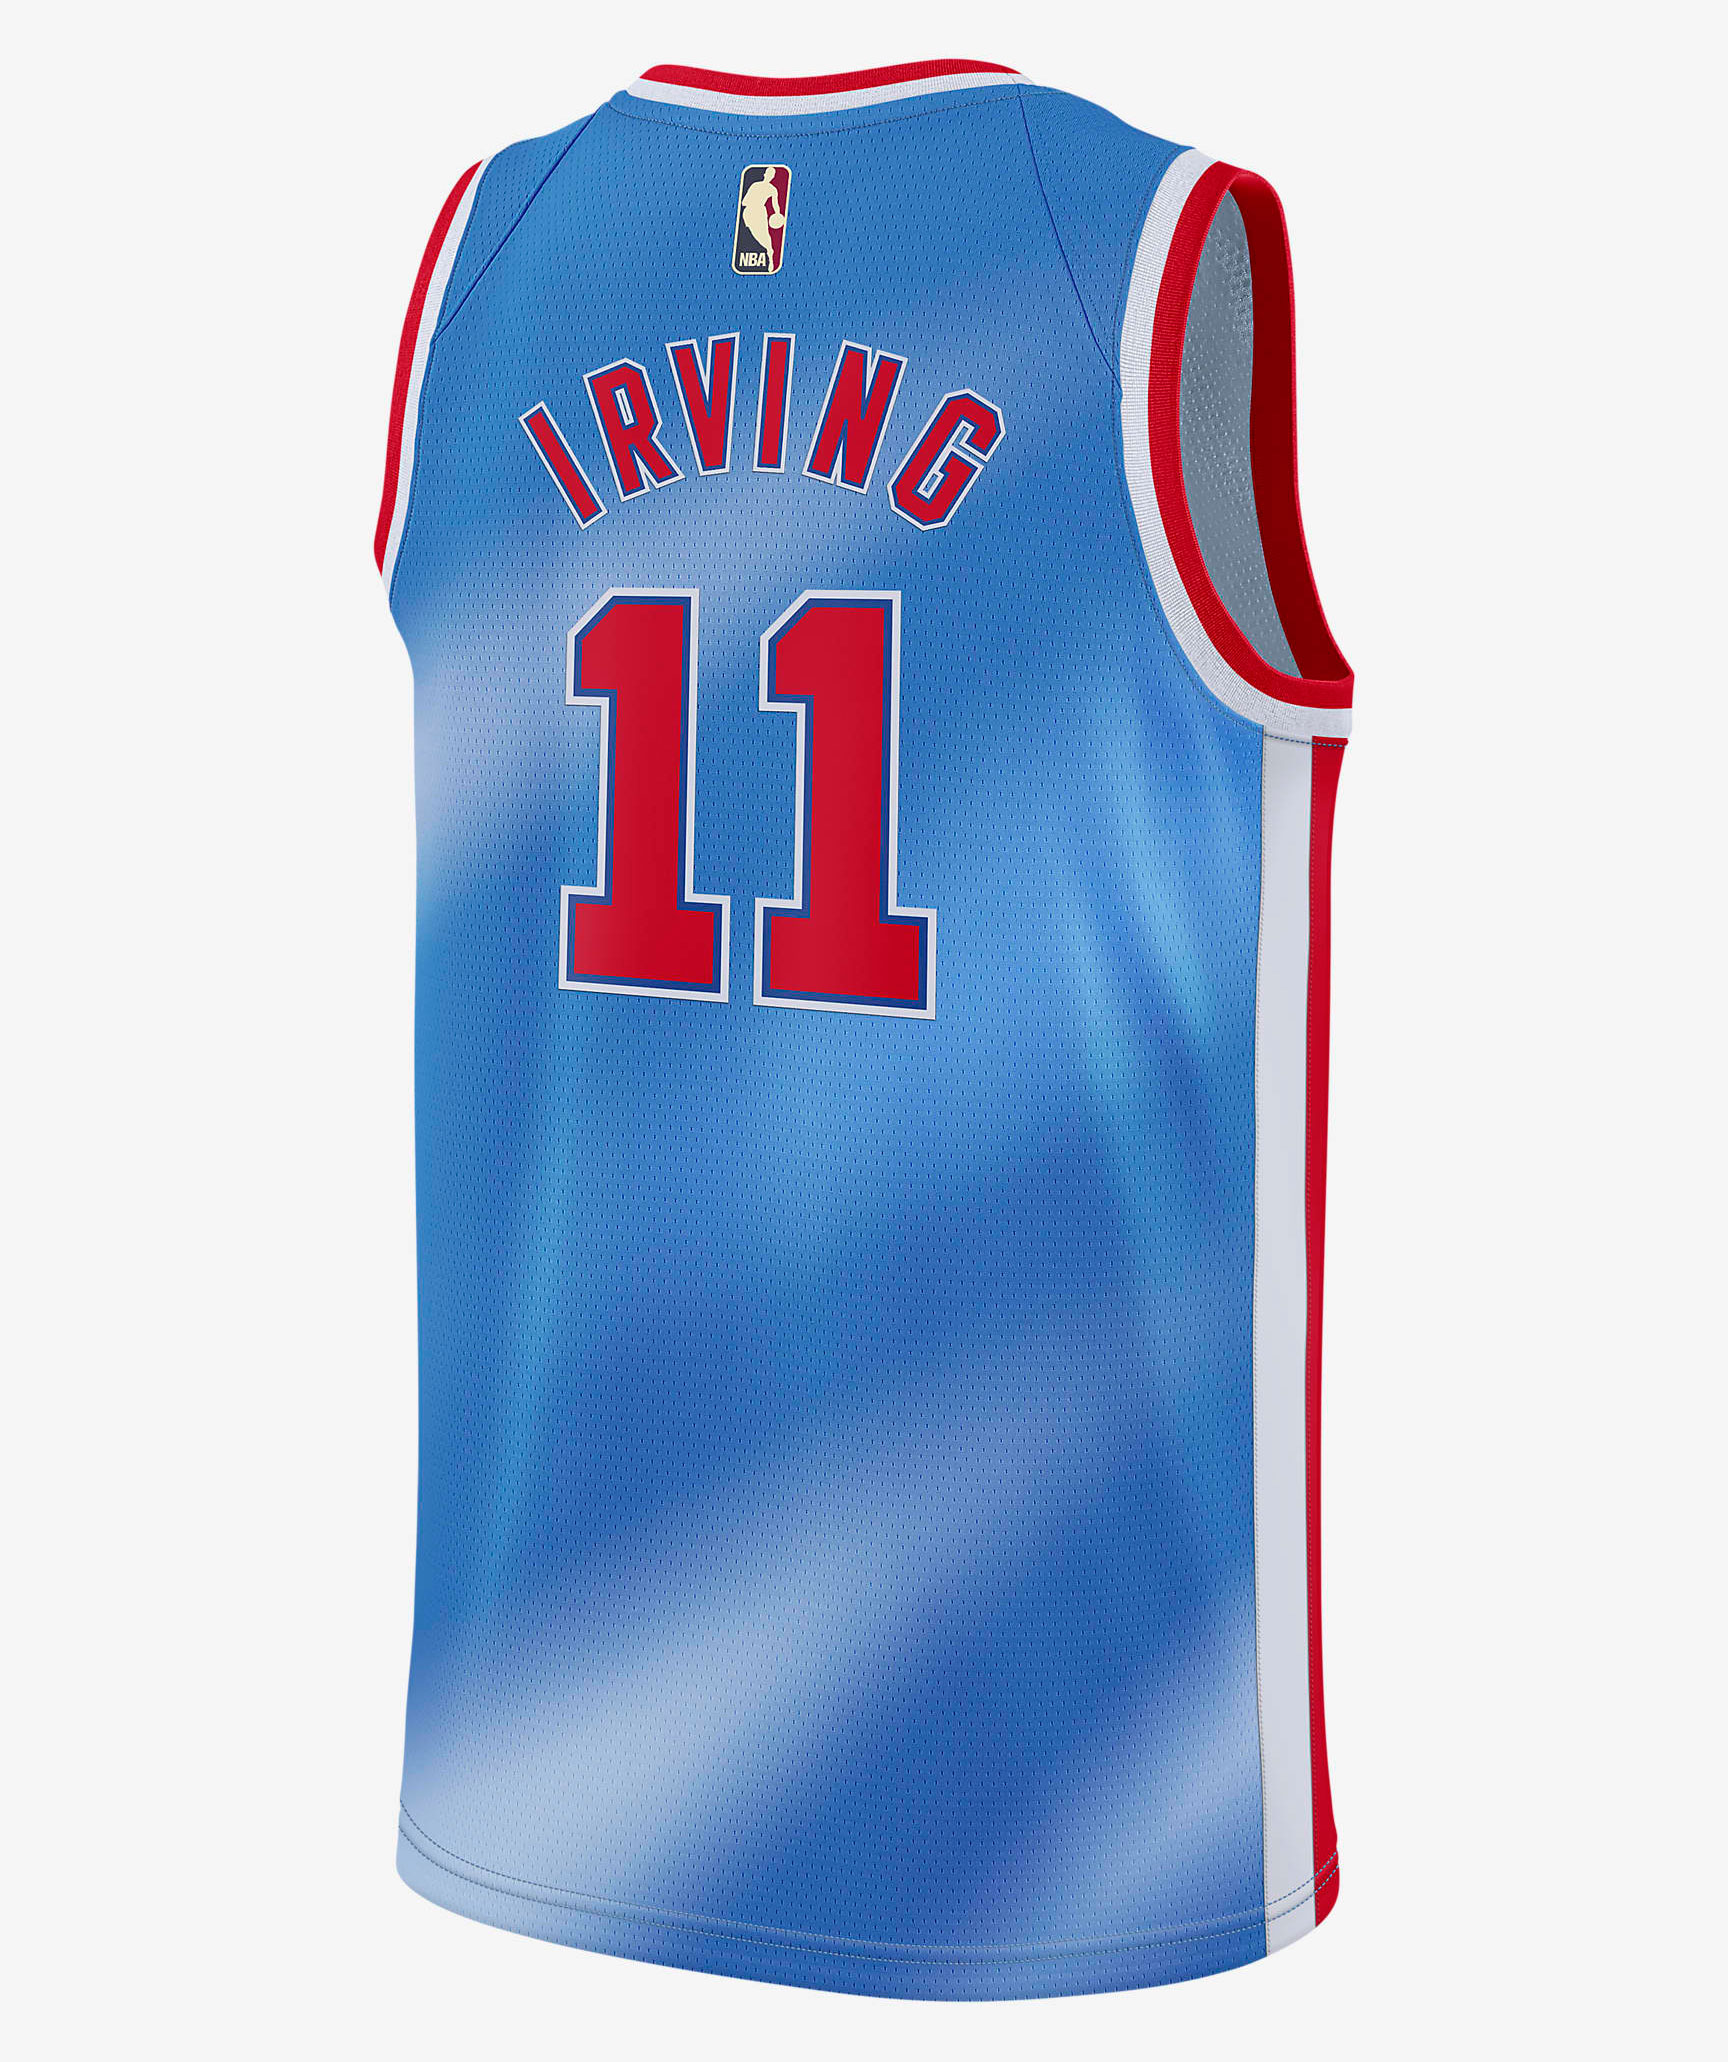 nike-brooklyn-nets-kyrie-irving-classic-edition-blue-red-jersey-2